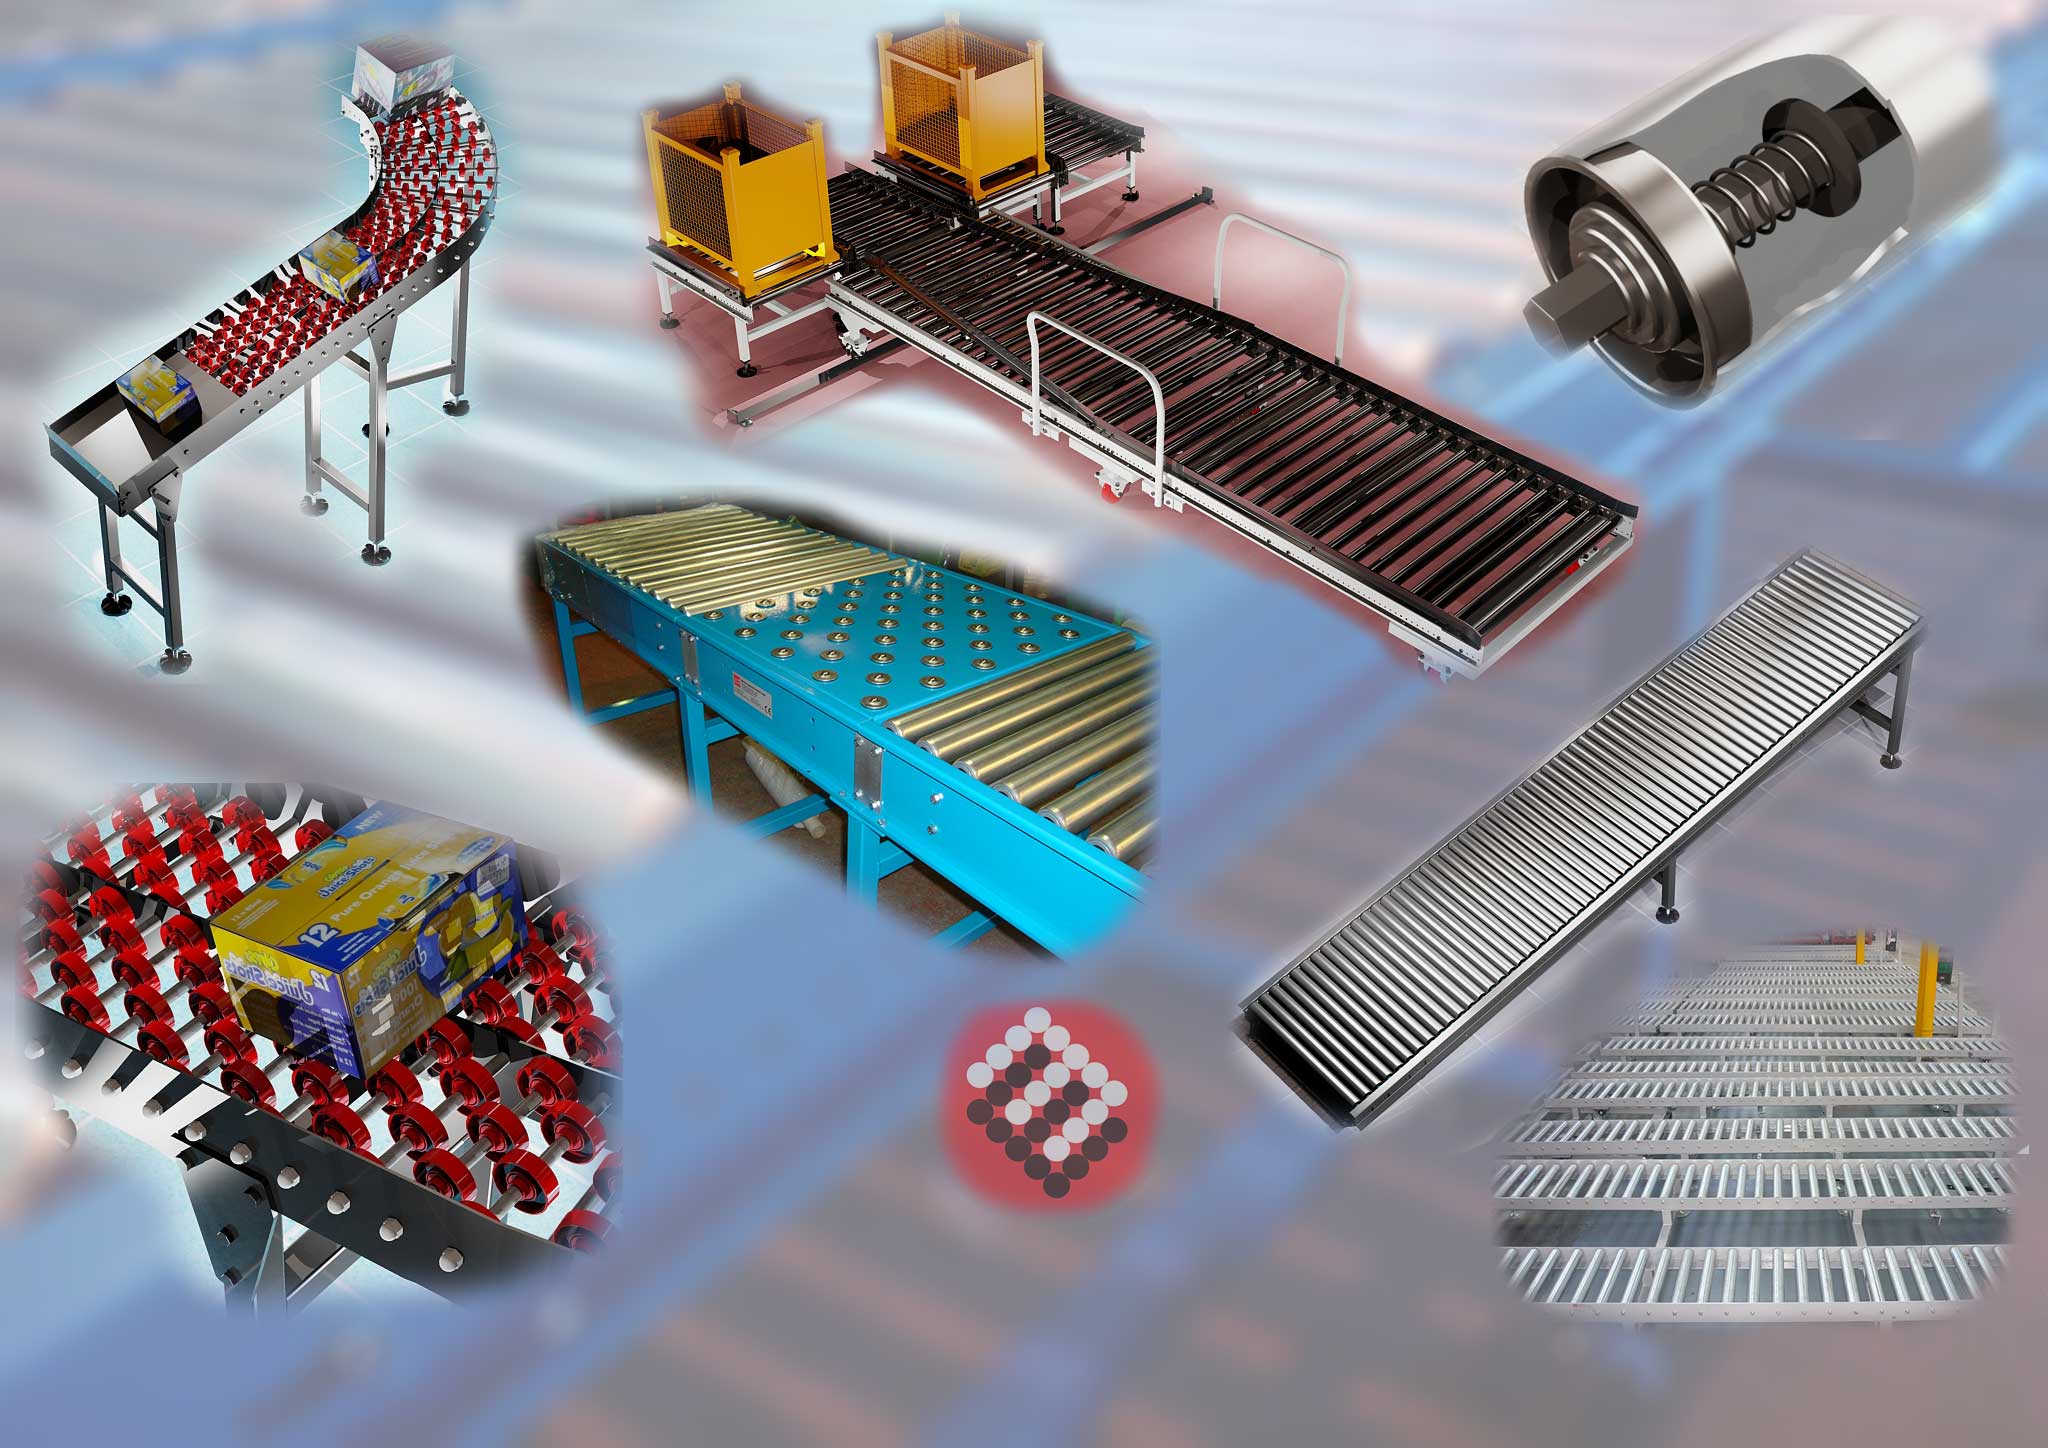 Suppliers of Turnover and Inspection Conveyors